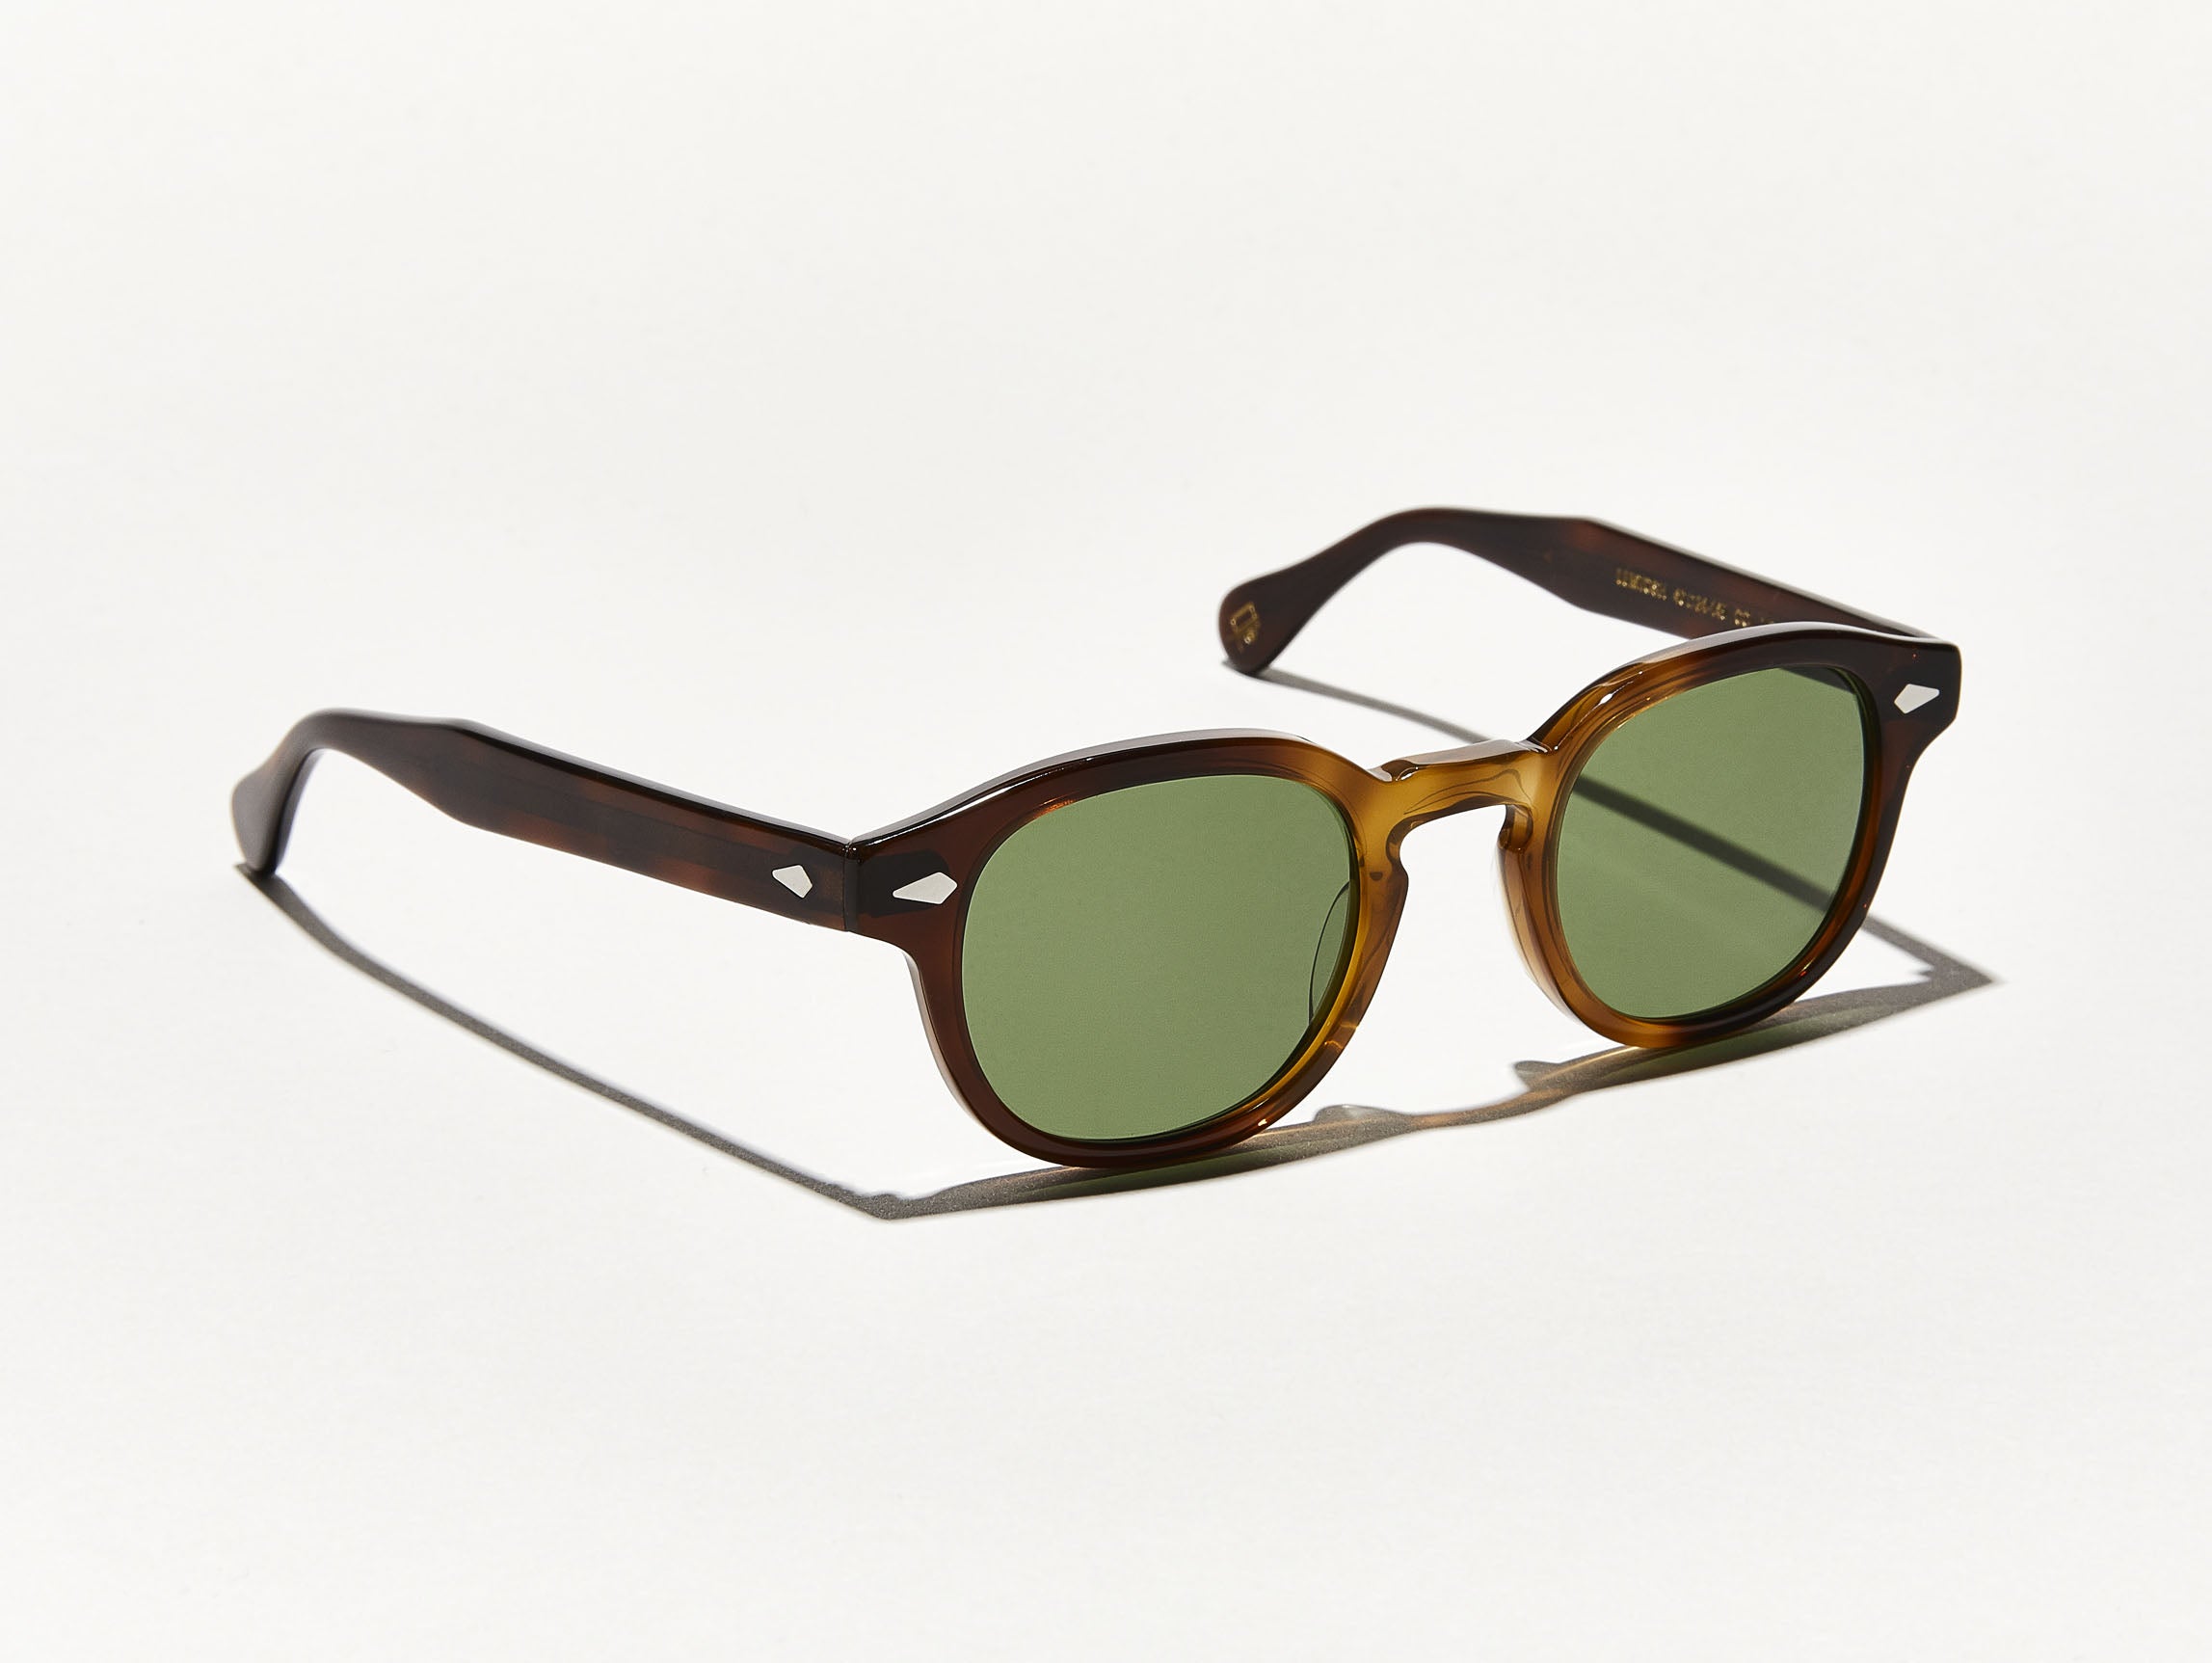 The LEMTOSH SUN in Tobacco with Calibar Green Glass Lenses